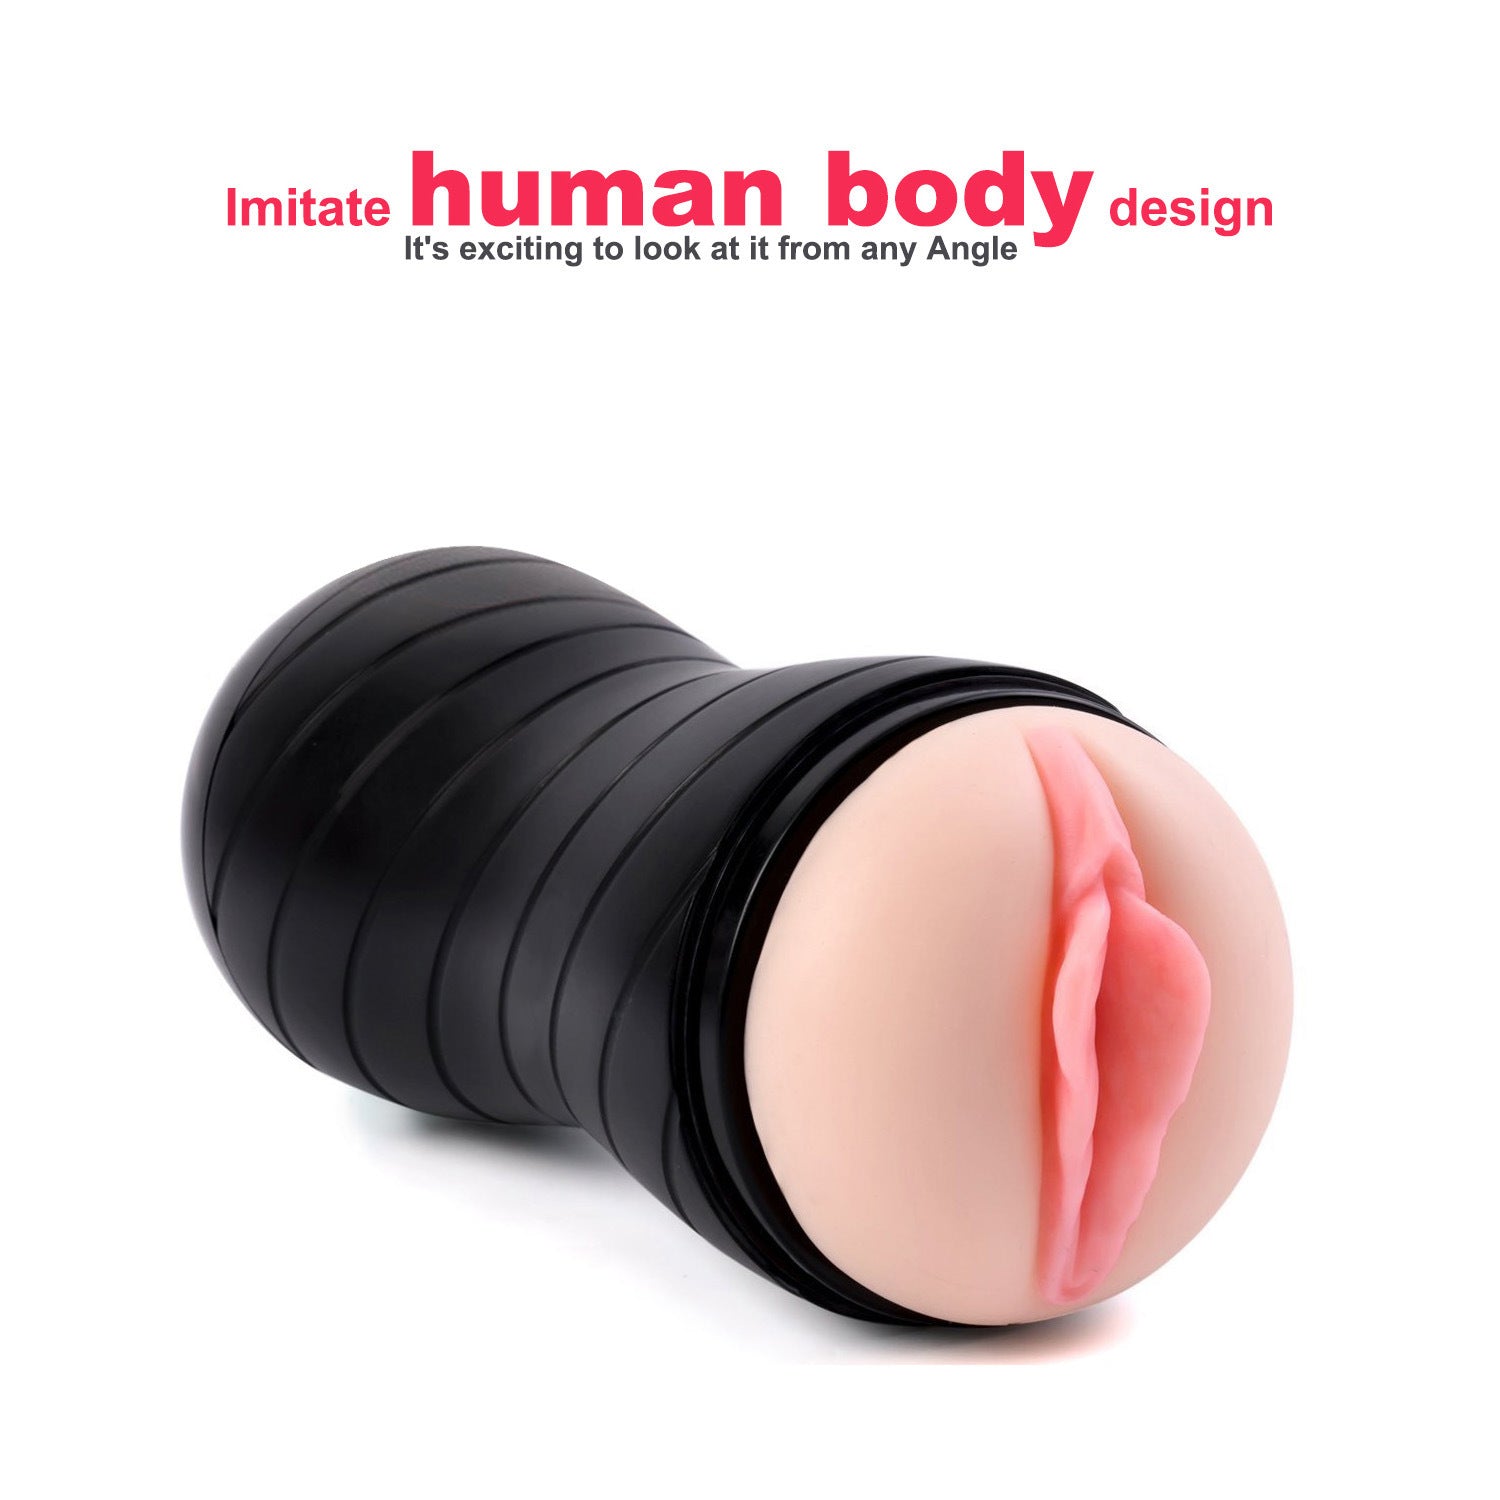 3 in 1 Male Masturbators Adult Sex Toys with Realistic Textured Mouth Vagina and Tight Anus, Men's Pocket Pussy Blowjob Stroker Anal Play Sex Toys for Men Masturbation